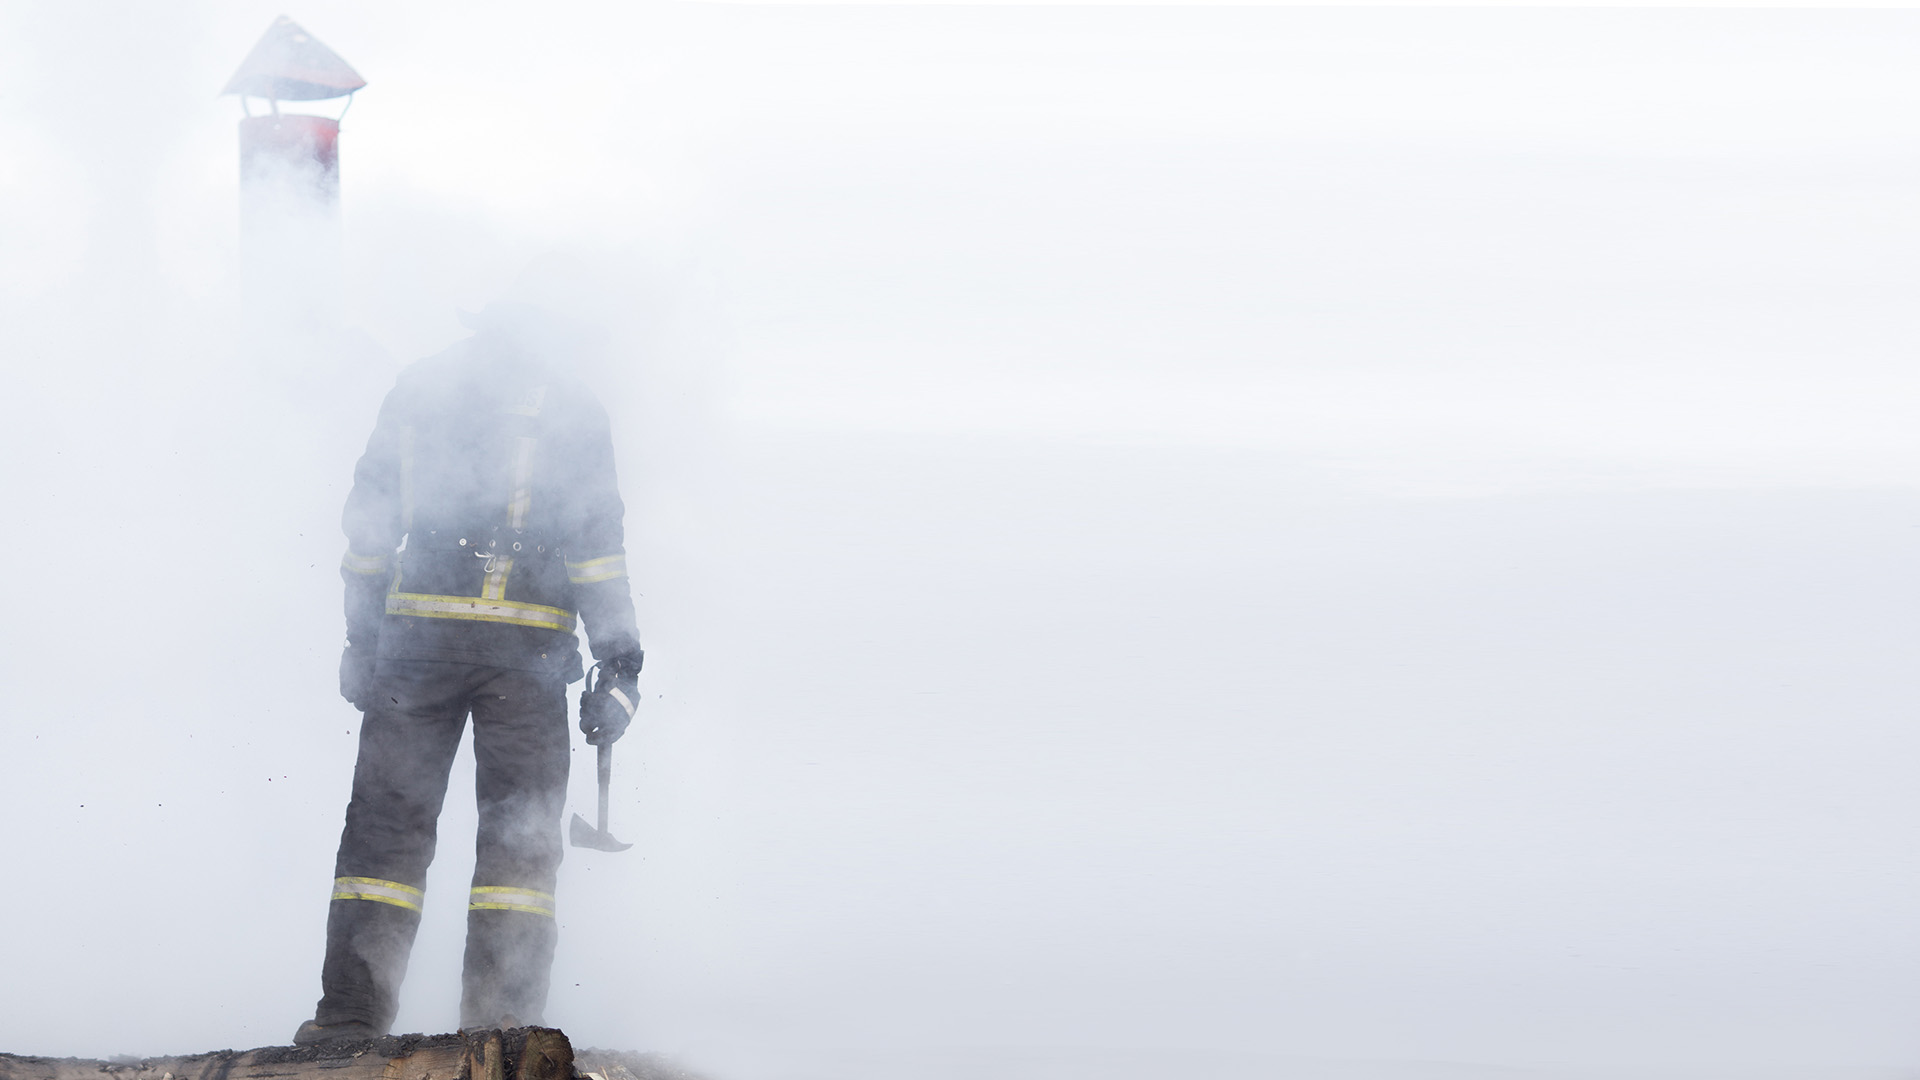 Firefighter with smoke